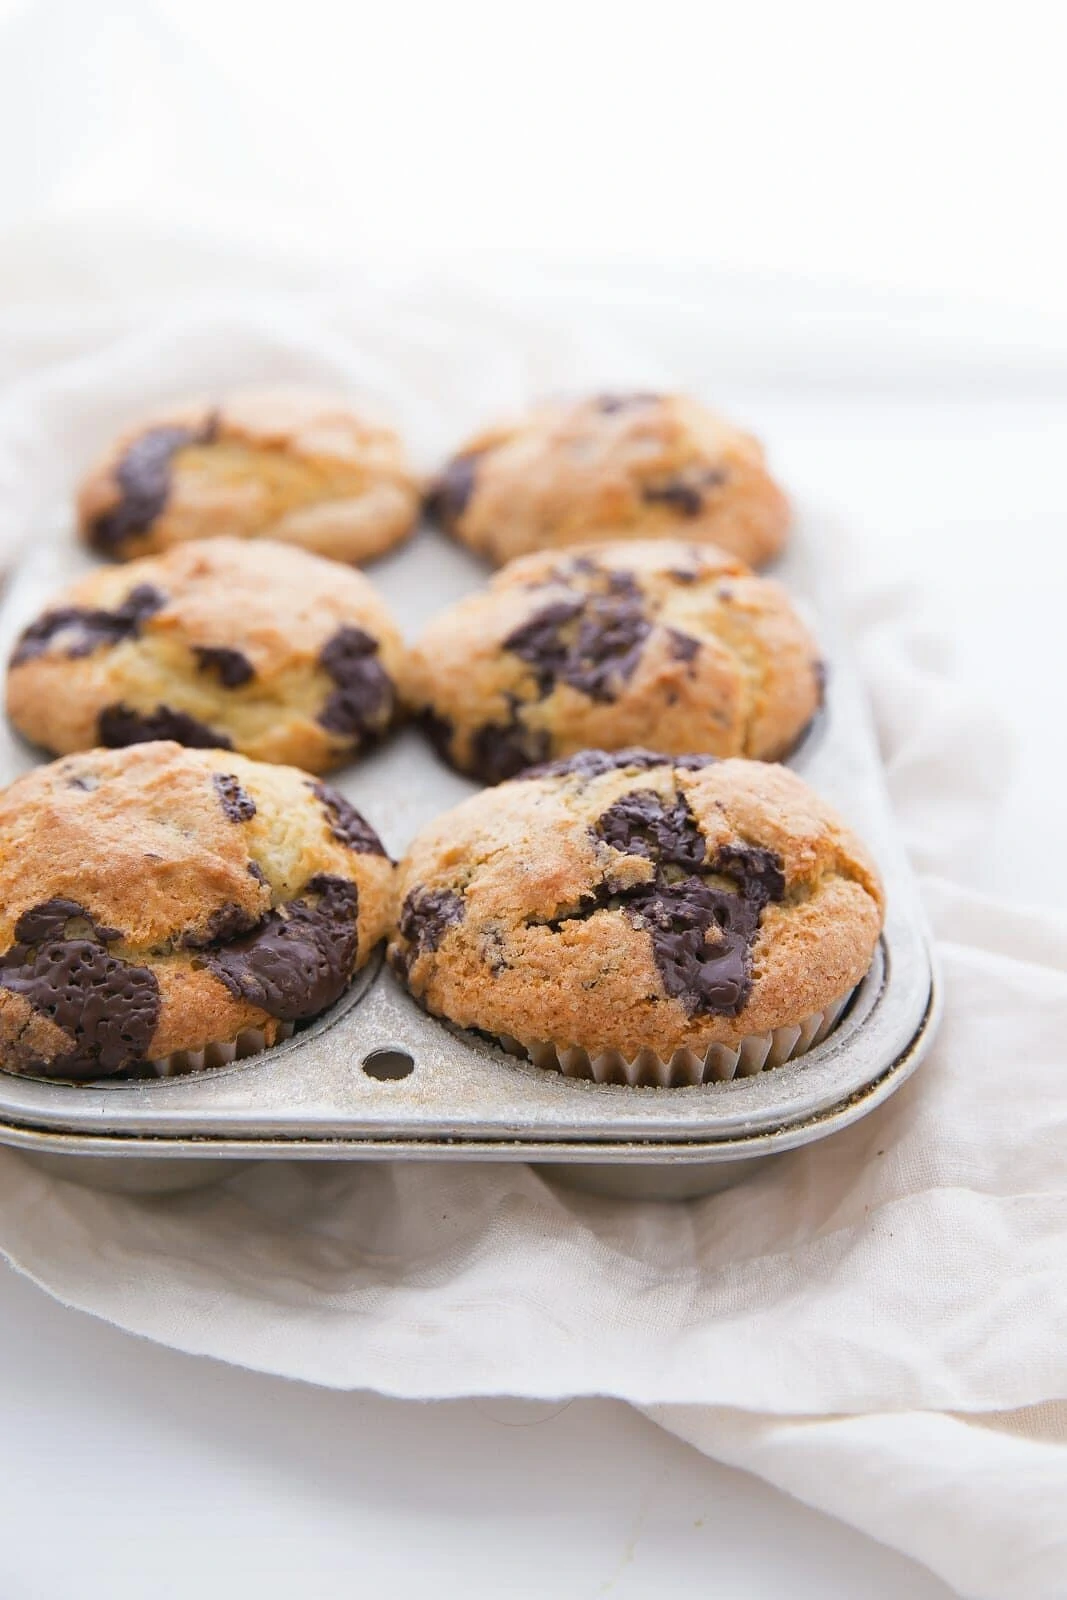 A bakery style muffin loaded with huge dark chocolate chunks!